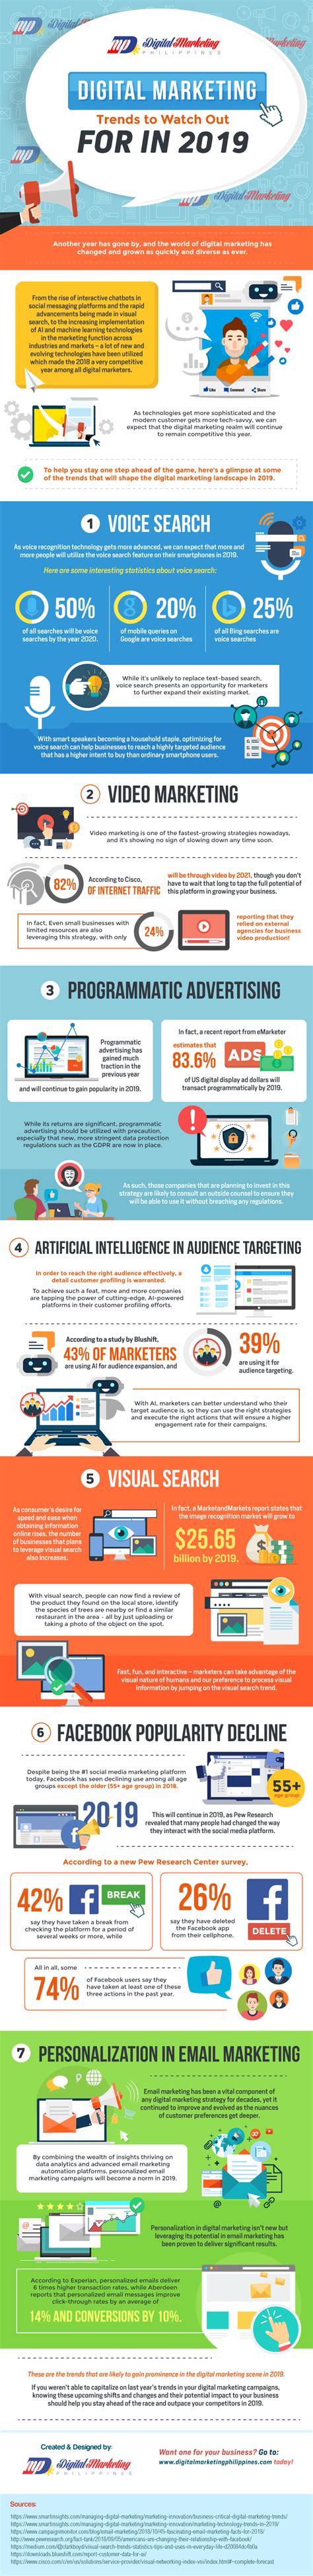 2019 Digital Marketing Trends To Watch Infographic Dmp